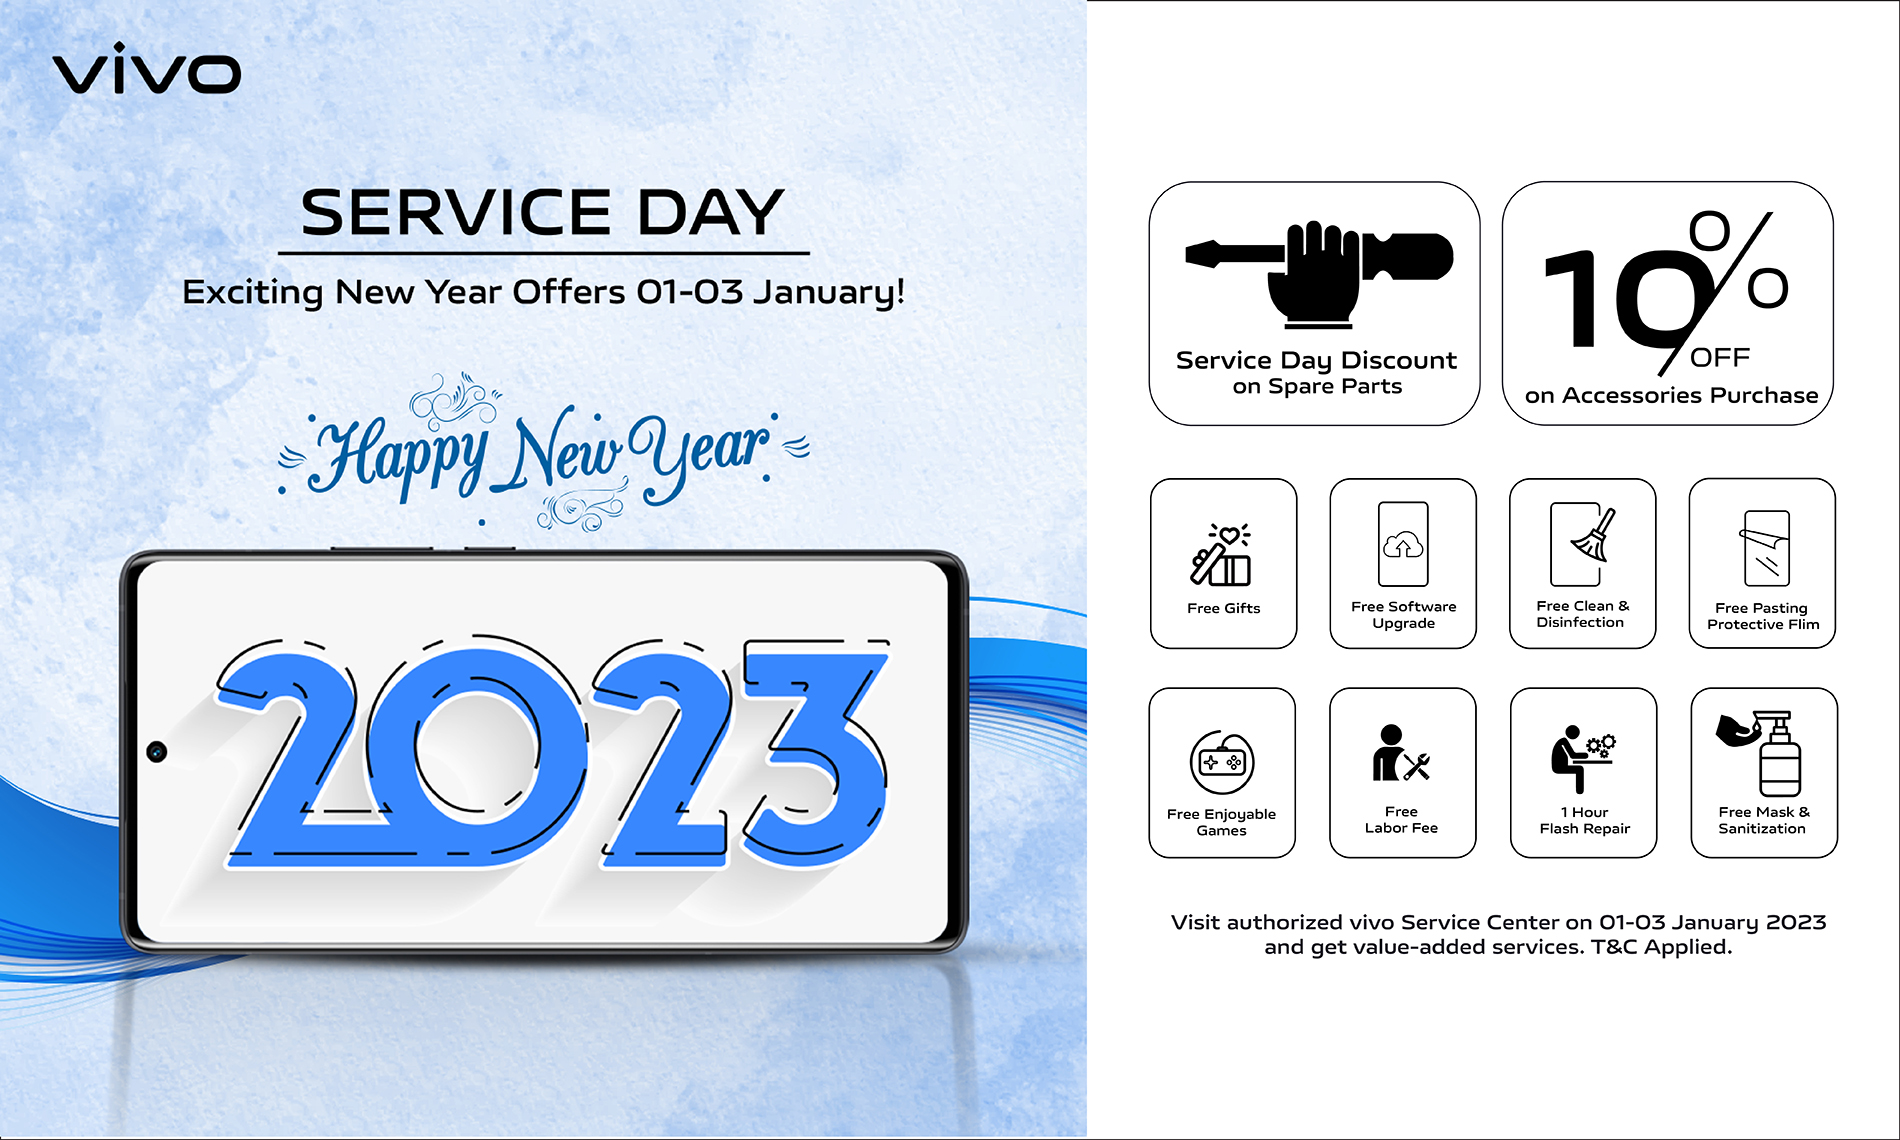 'Happy New Year-2023 with Service Day' Offers with Exciting Gifts!!